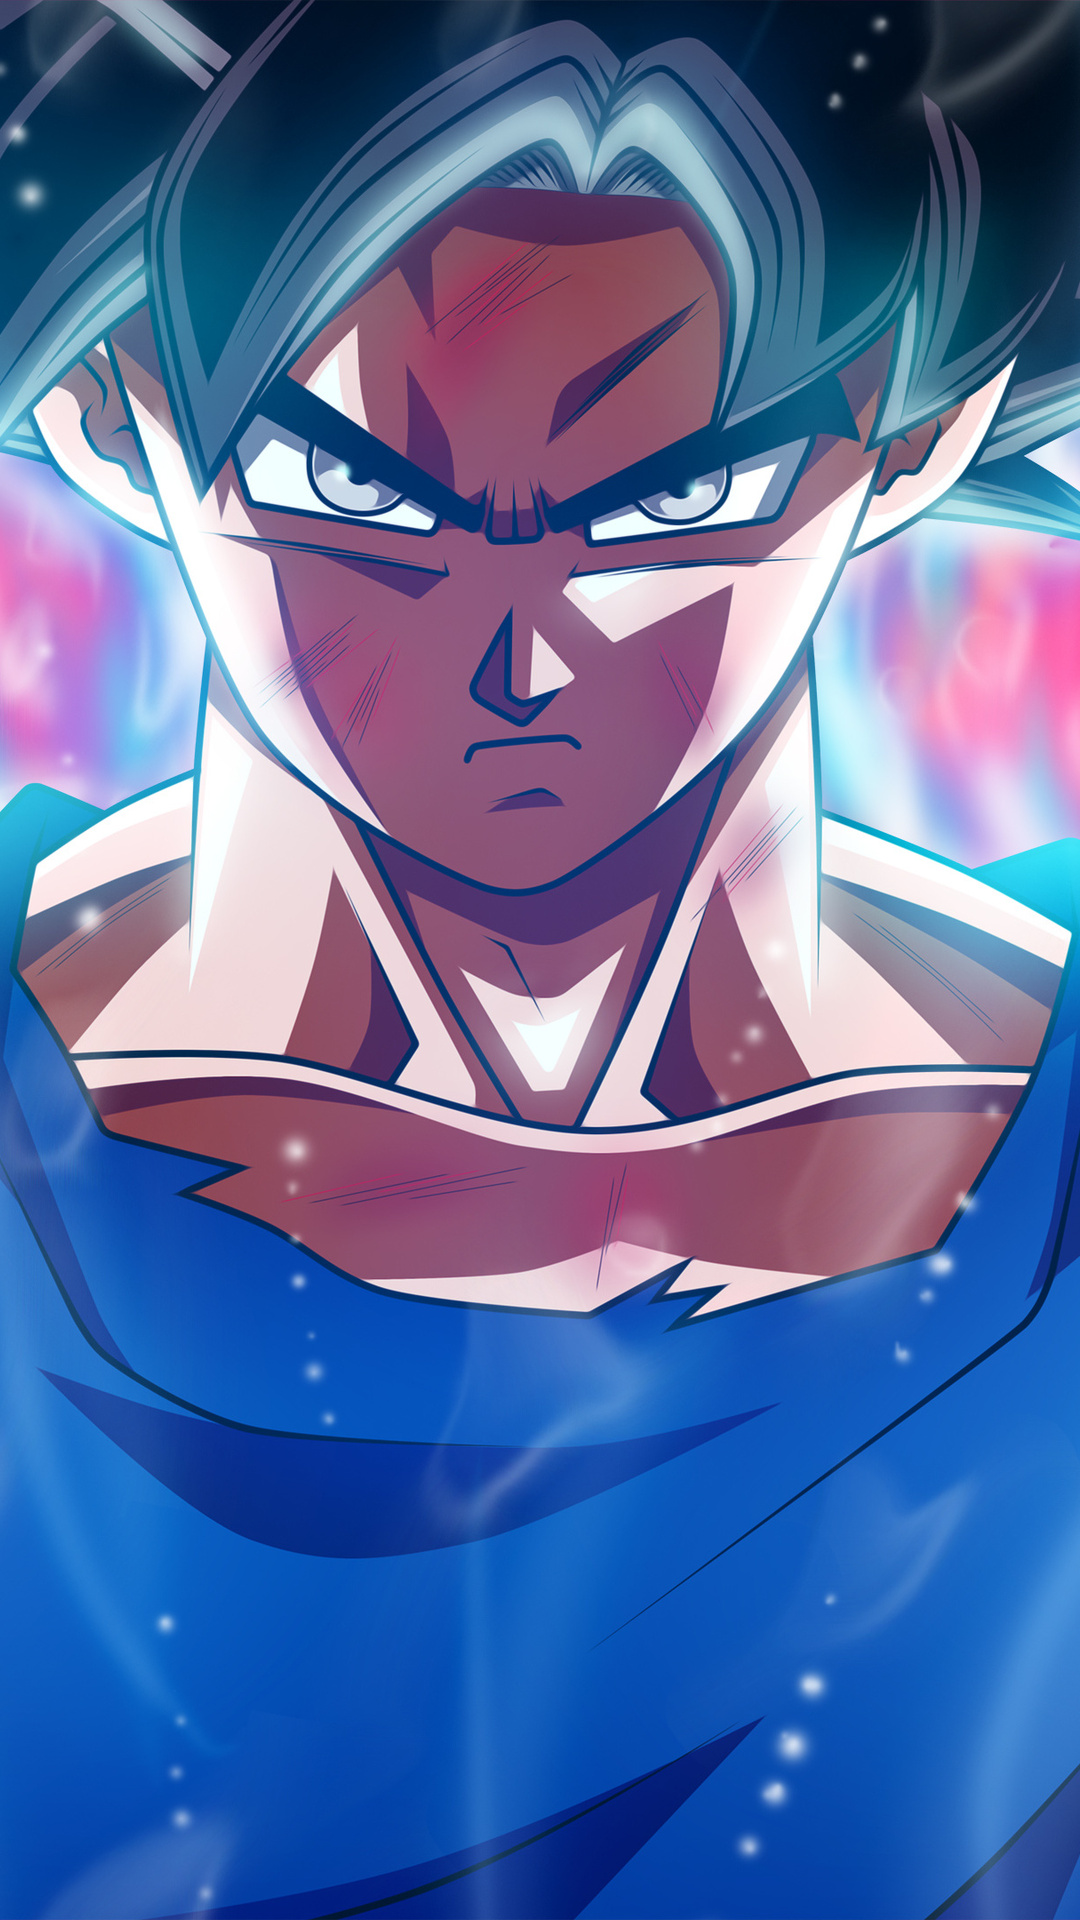 1080x1920 Ultra Instinct Goku 4k Iphone 7,6s,6 Plus, Pixel xl ,One Plus  3,3t,5 HD 4k Wallpapers, Images, Backgrounds, Photos and Pictures